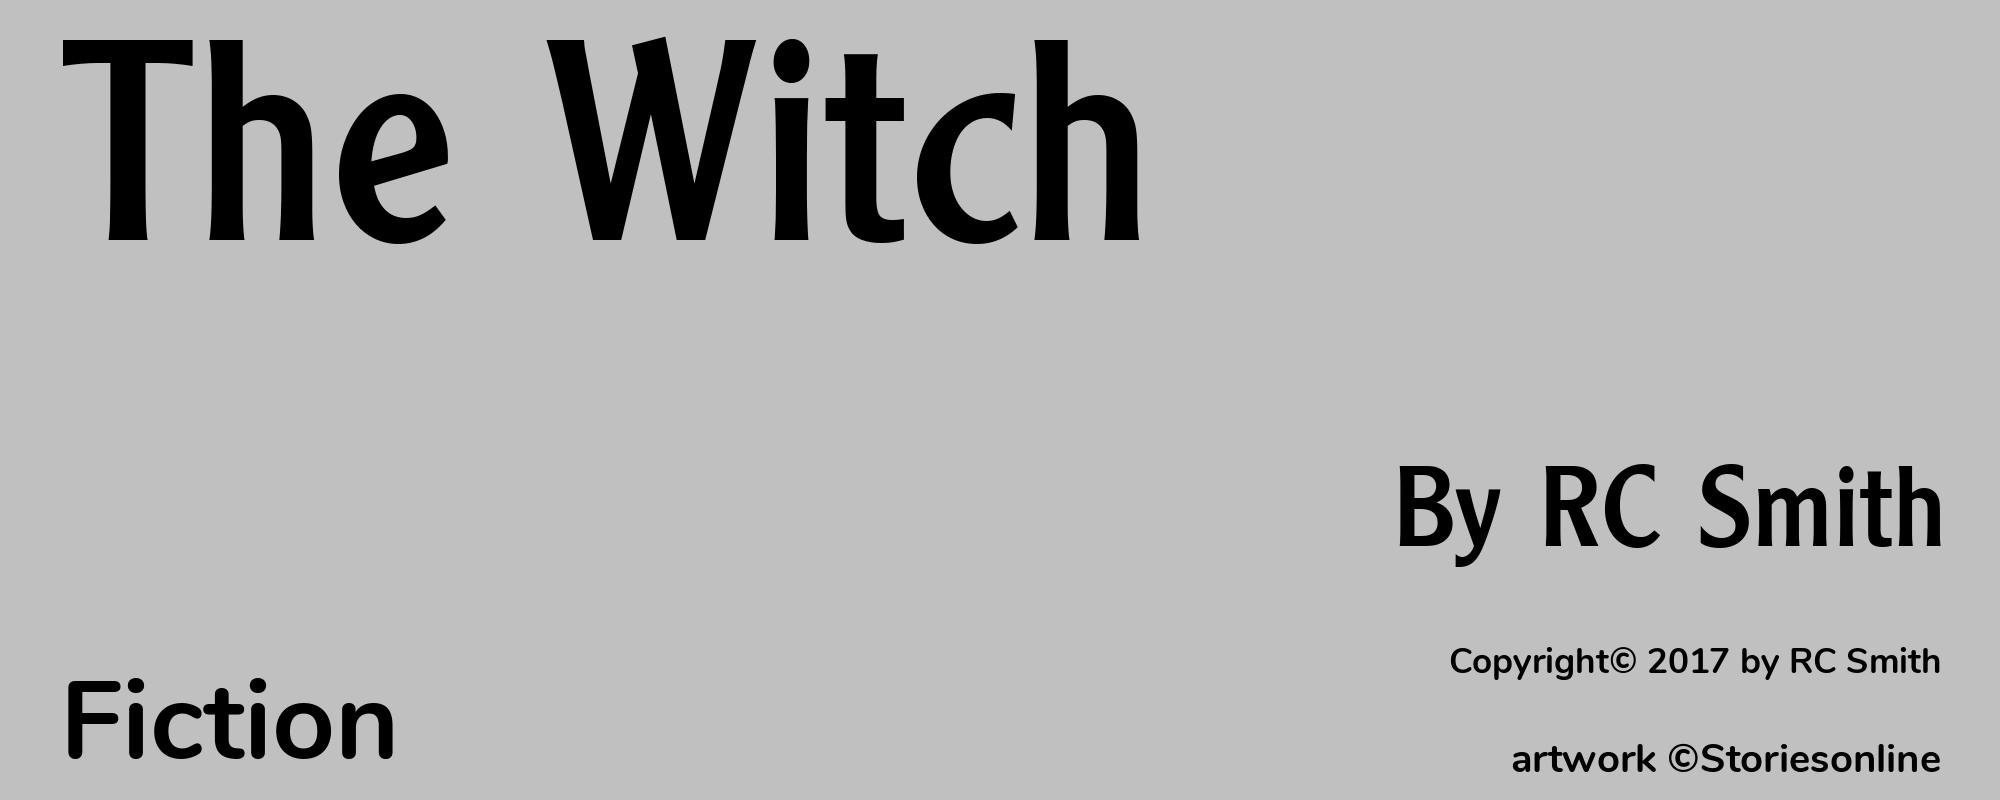 The Witch - Cover